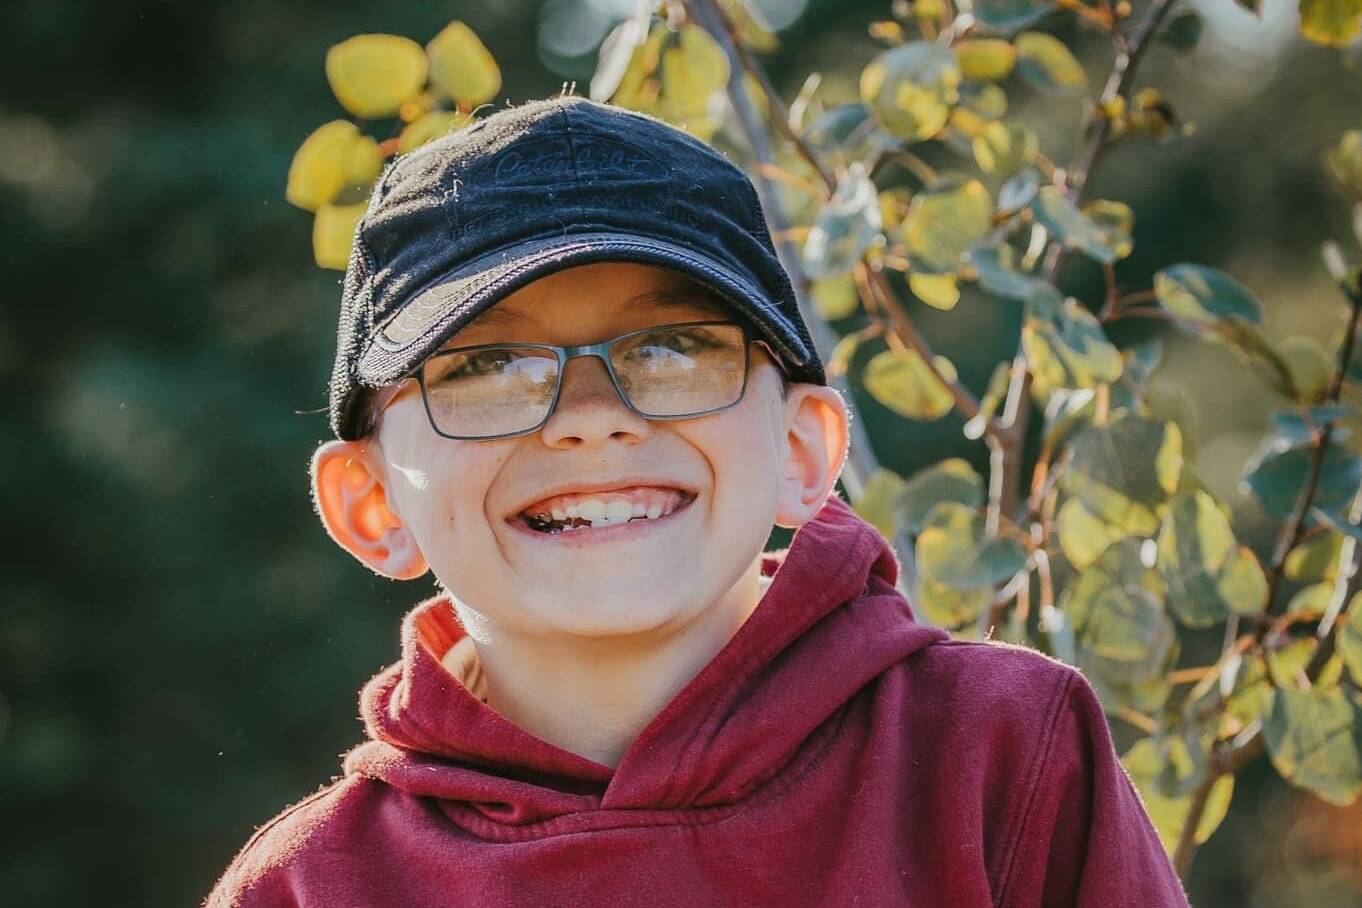 Carter Vigh passed away at the age of nine this summer from an asthma attack. Now his parents are using his story to raise awareness about the importance of air quality monitoring systems. (Amber Vigh photo)